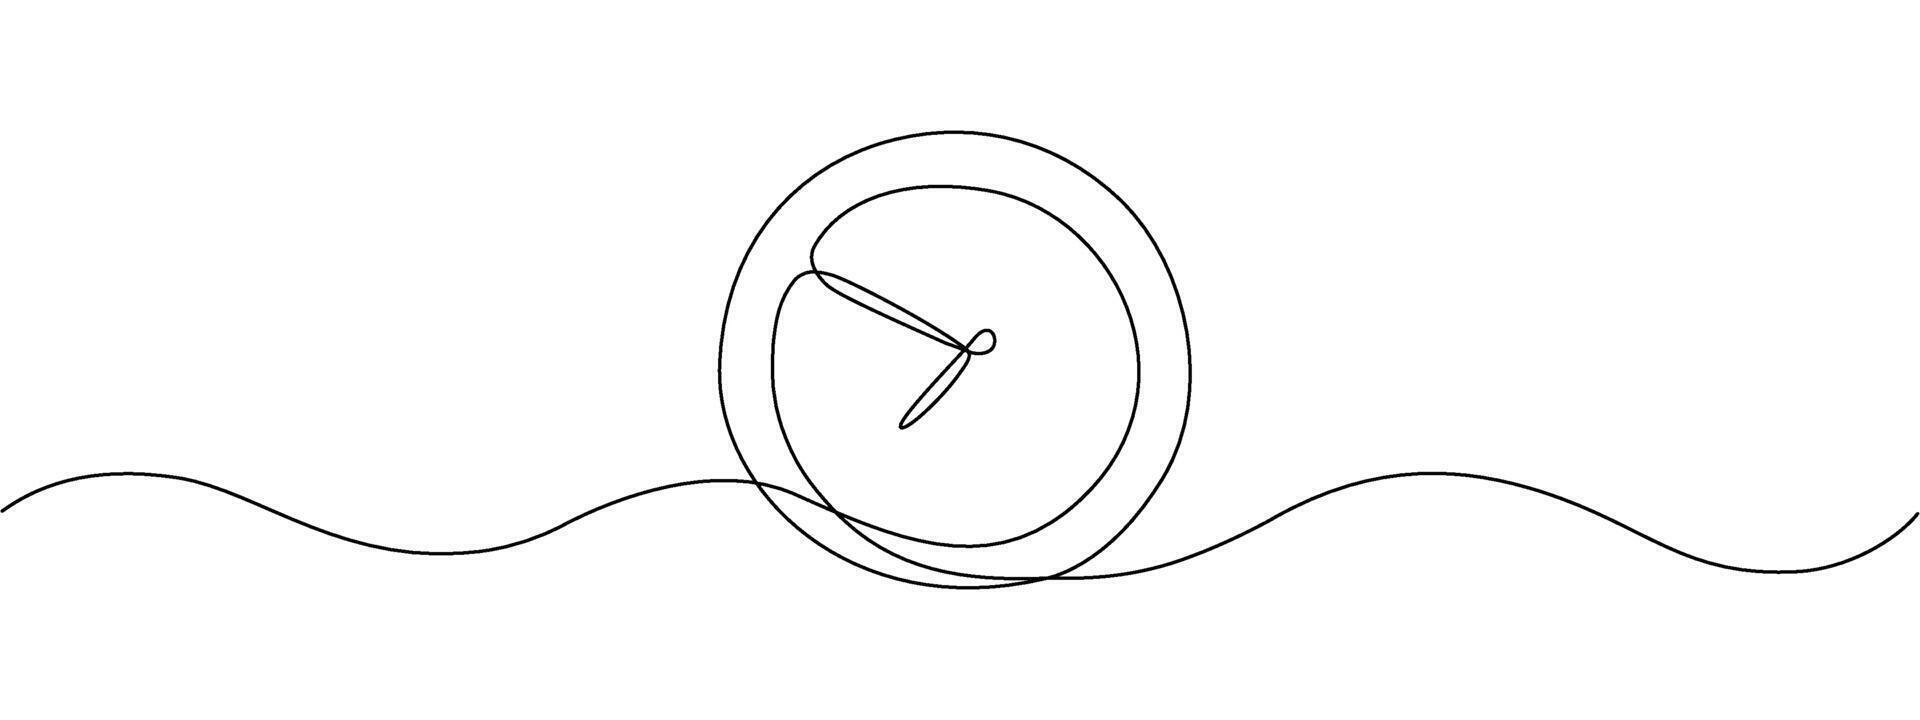 A continuous one line drawing of a clock. Vector illustration handdrawn style